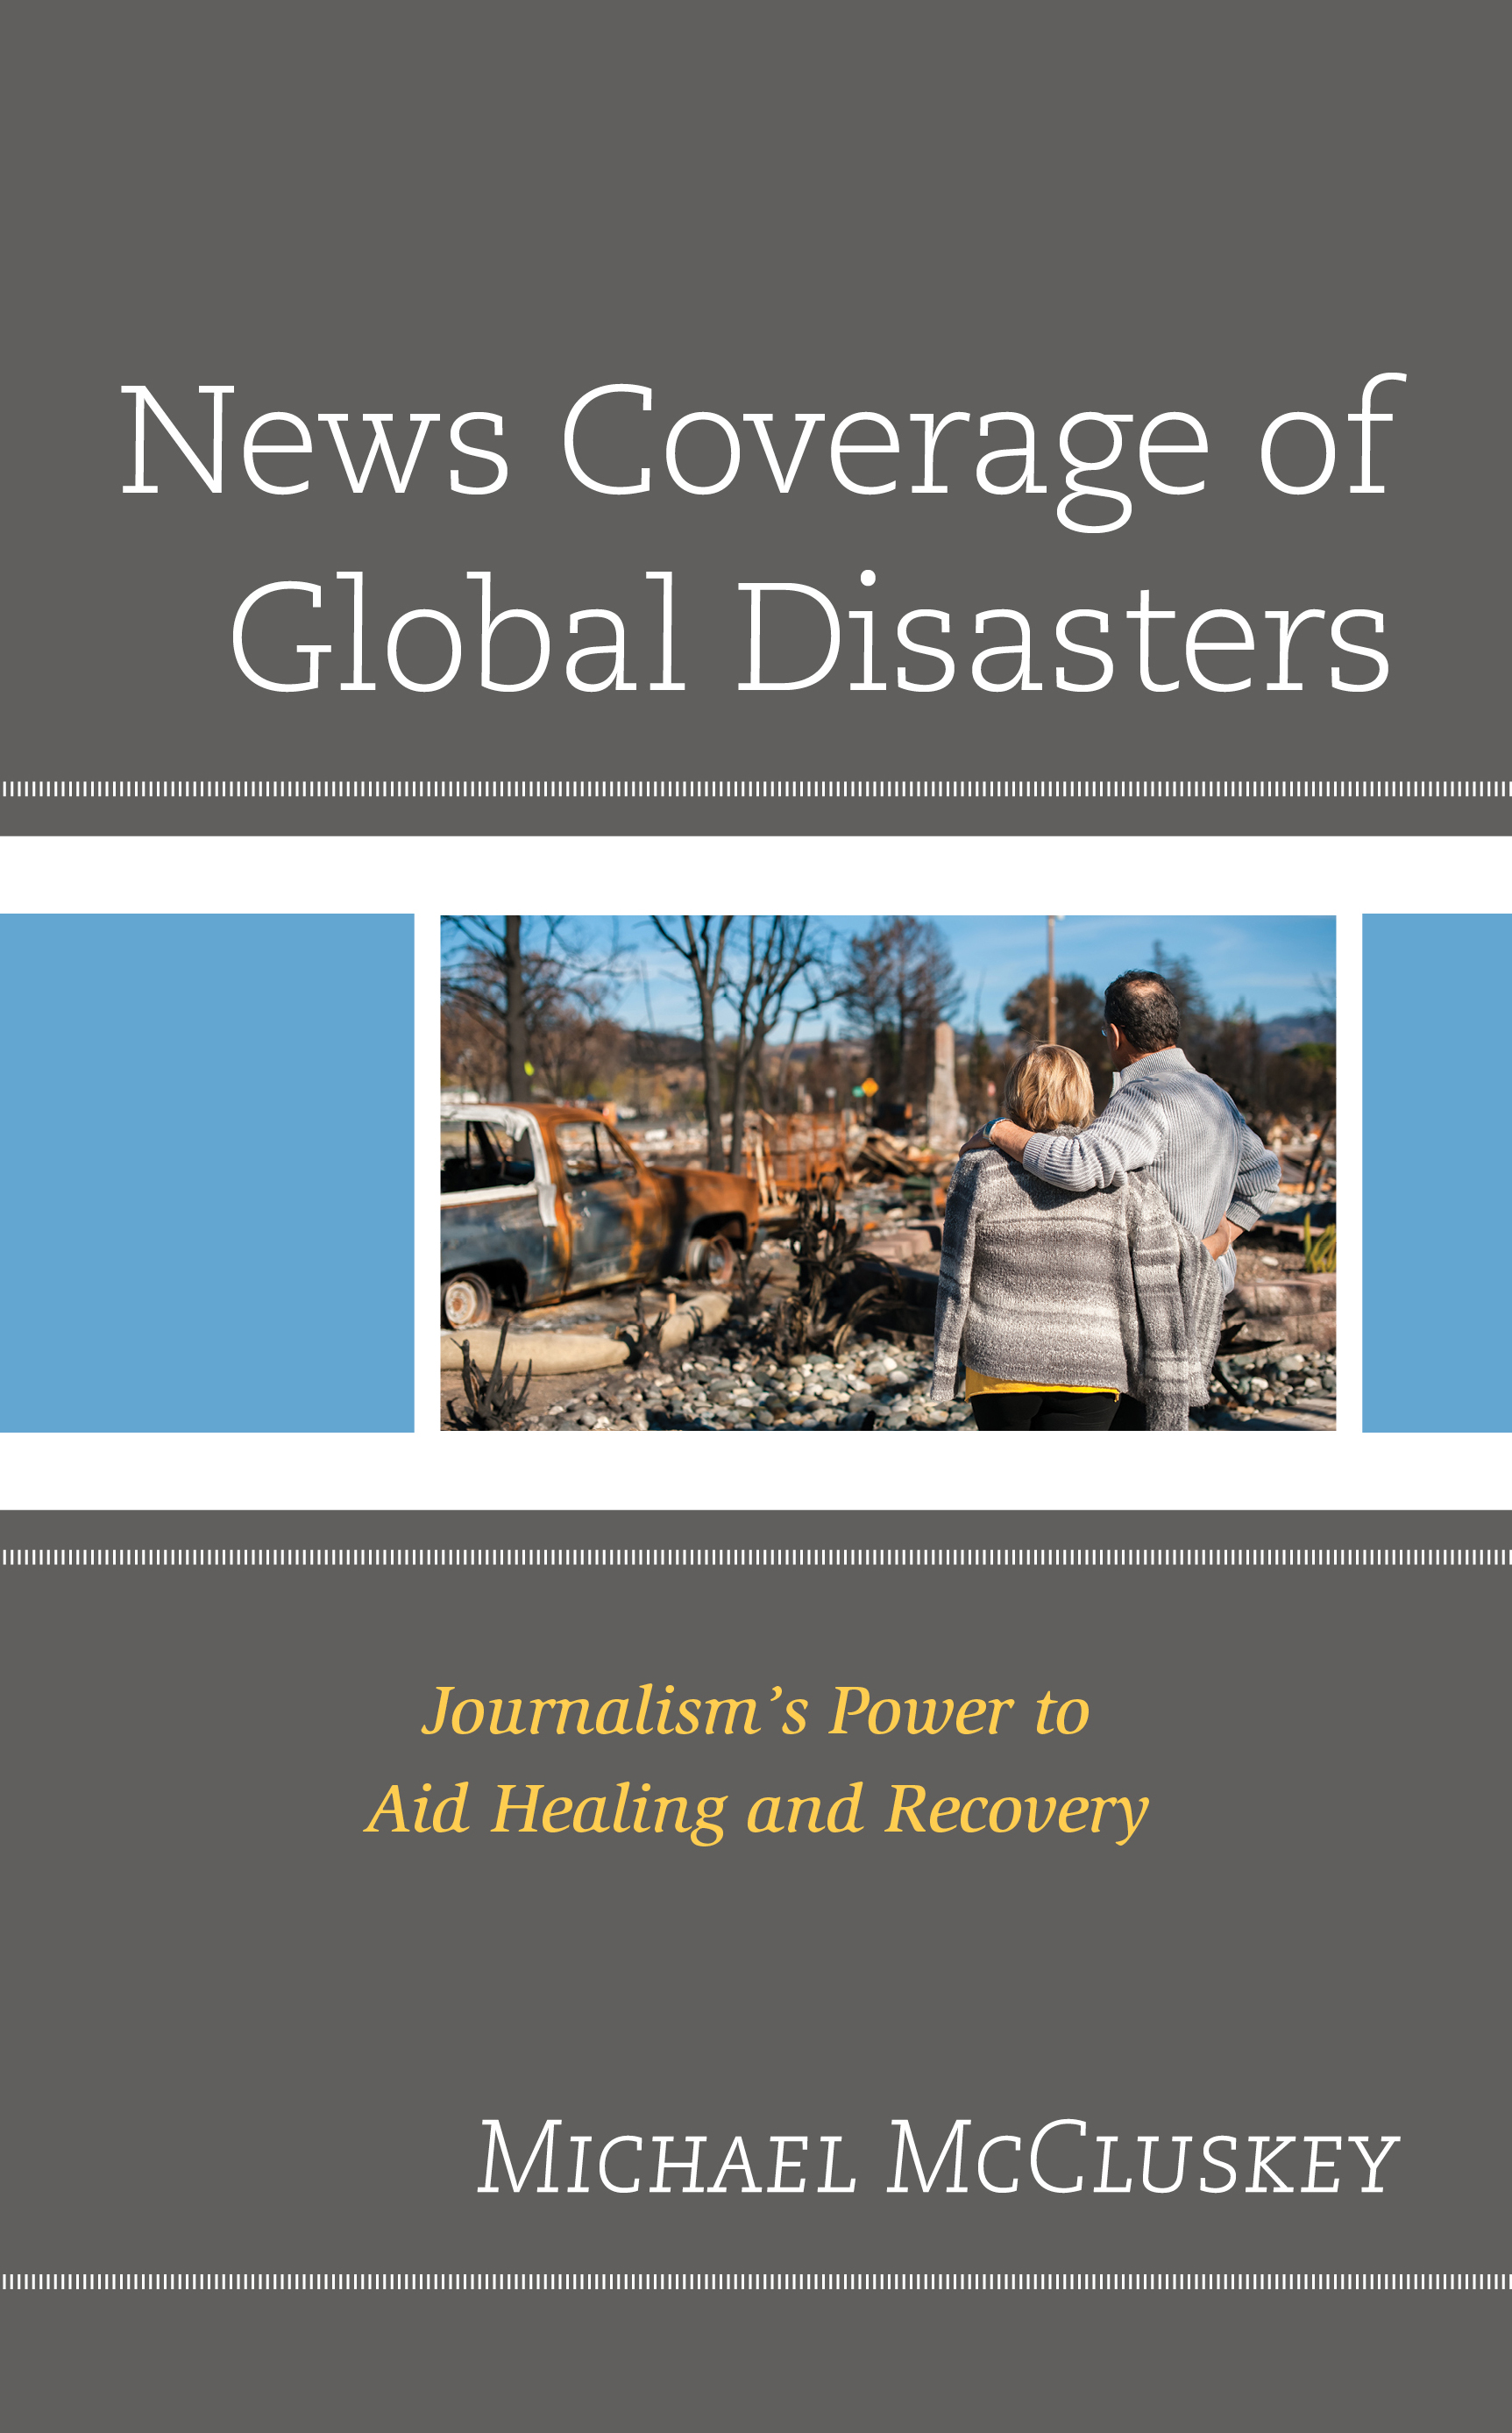 News Coverage of Global Disasters: Journalism's Power to Aid Healing and Recovery